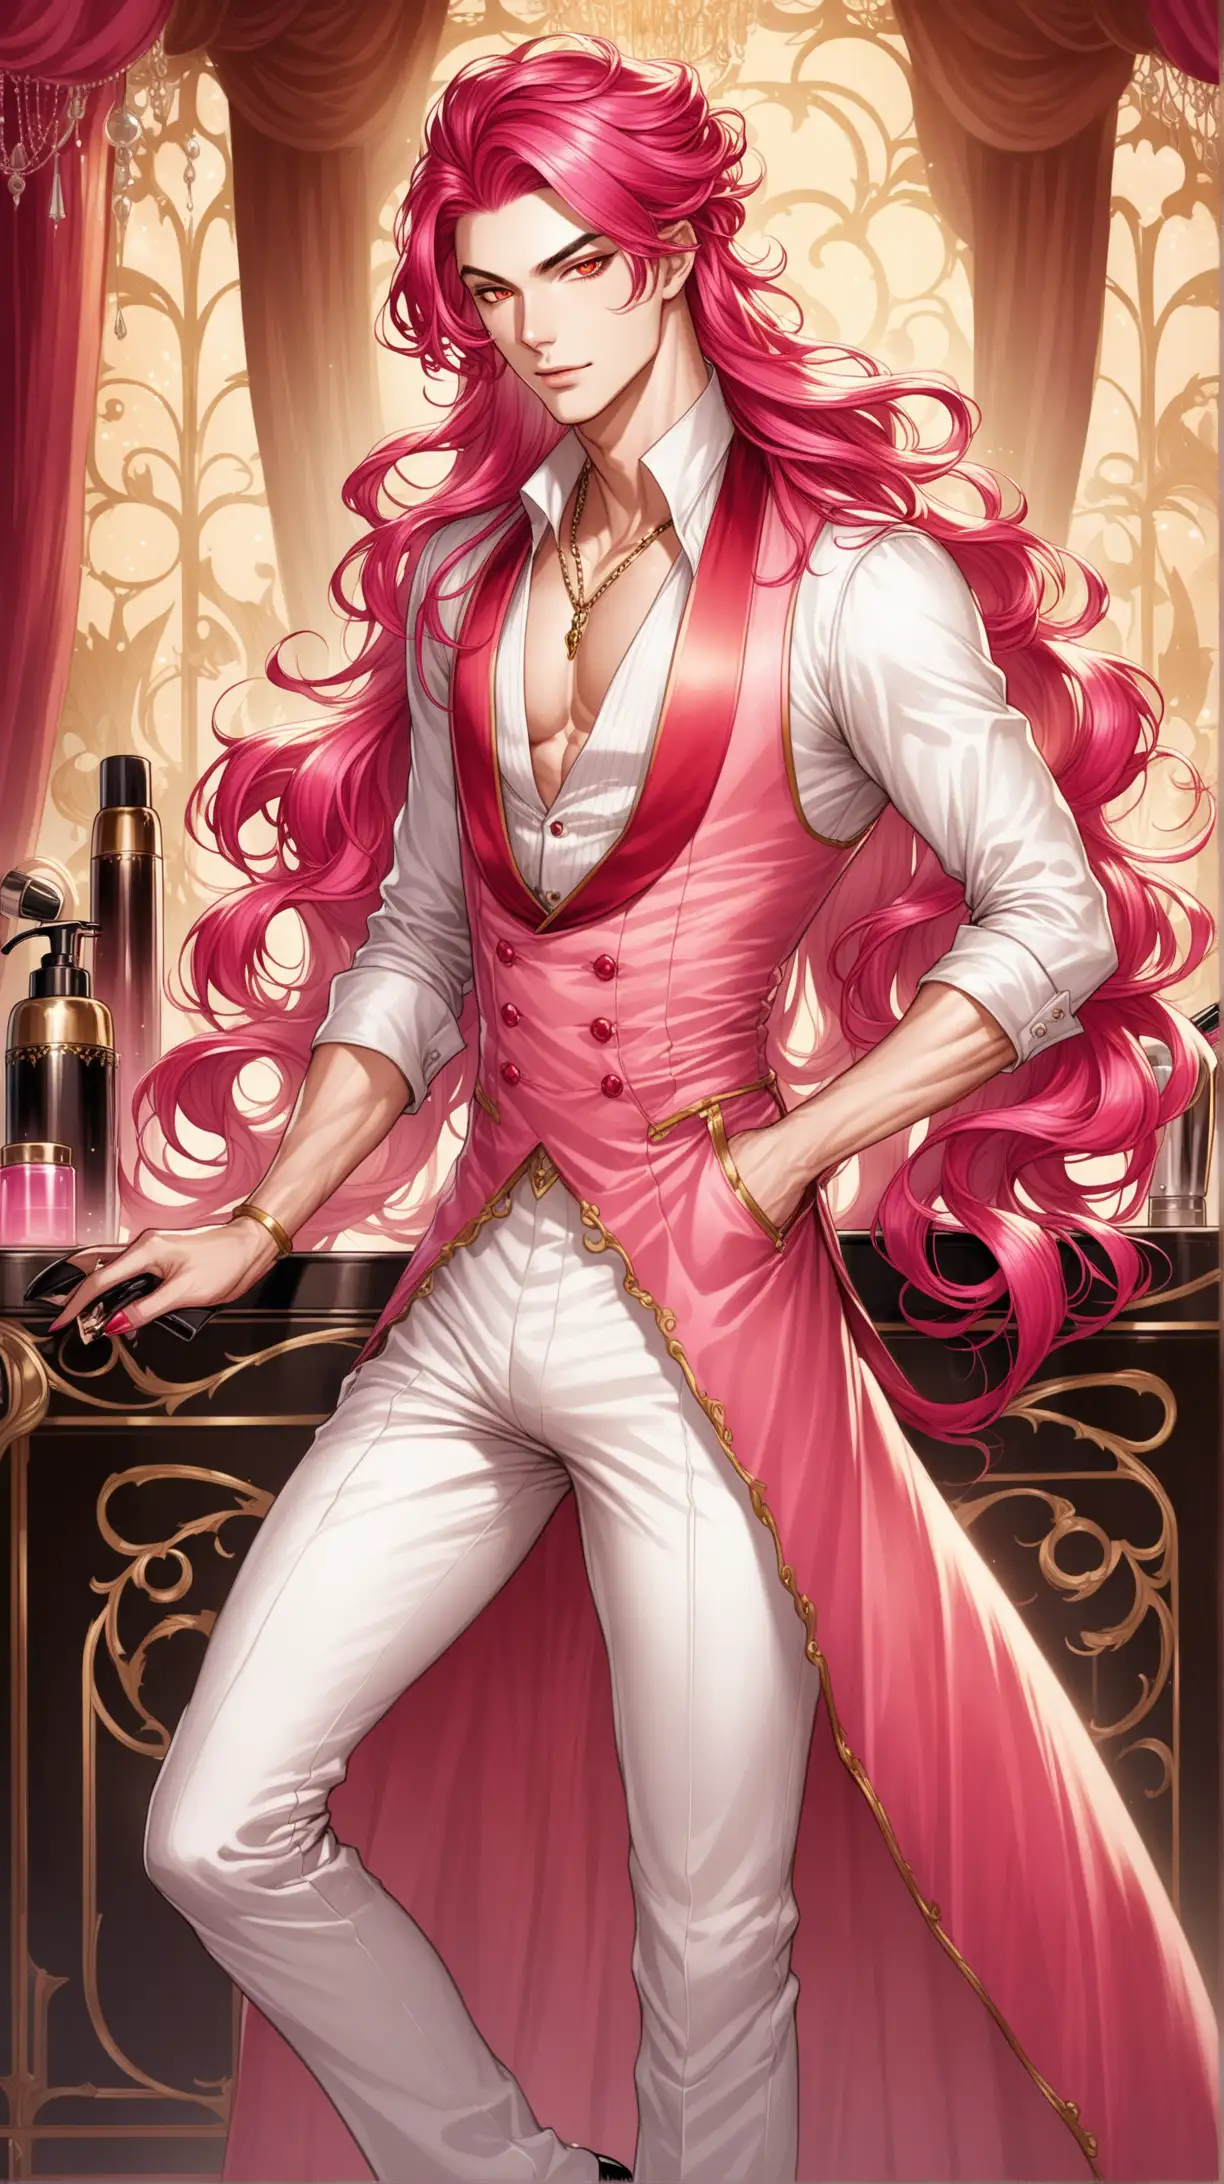 Fabulous Fantasy Male Hairdresser with Long Pink Hair and Fiery Red Eyes